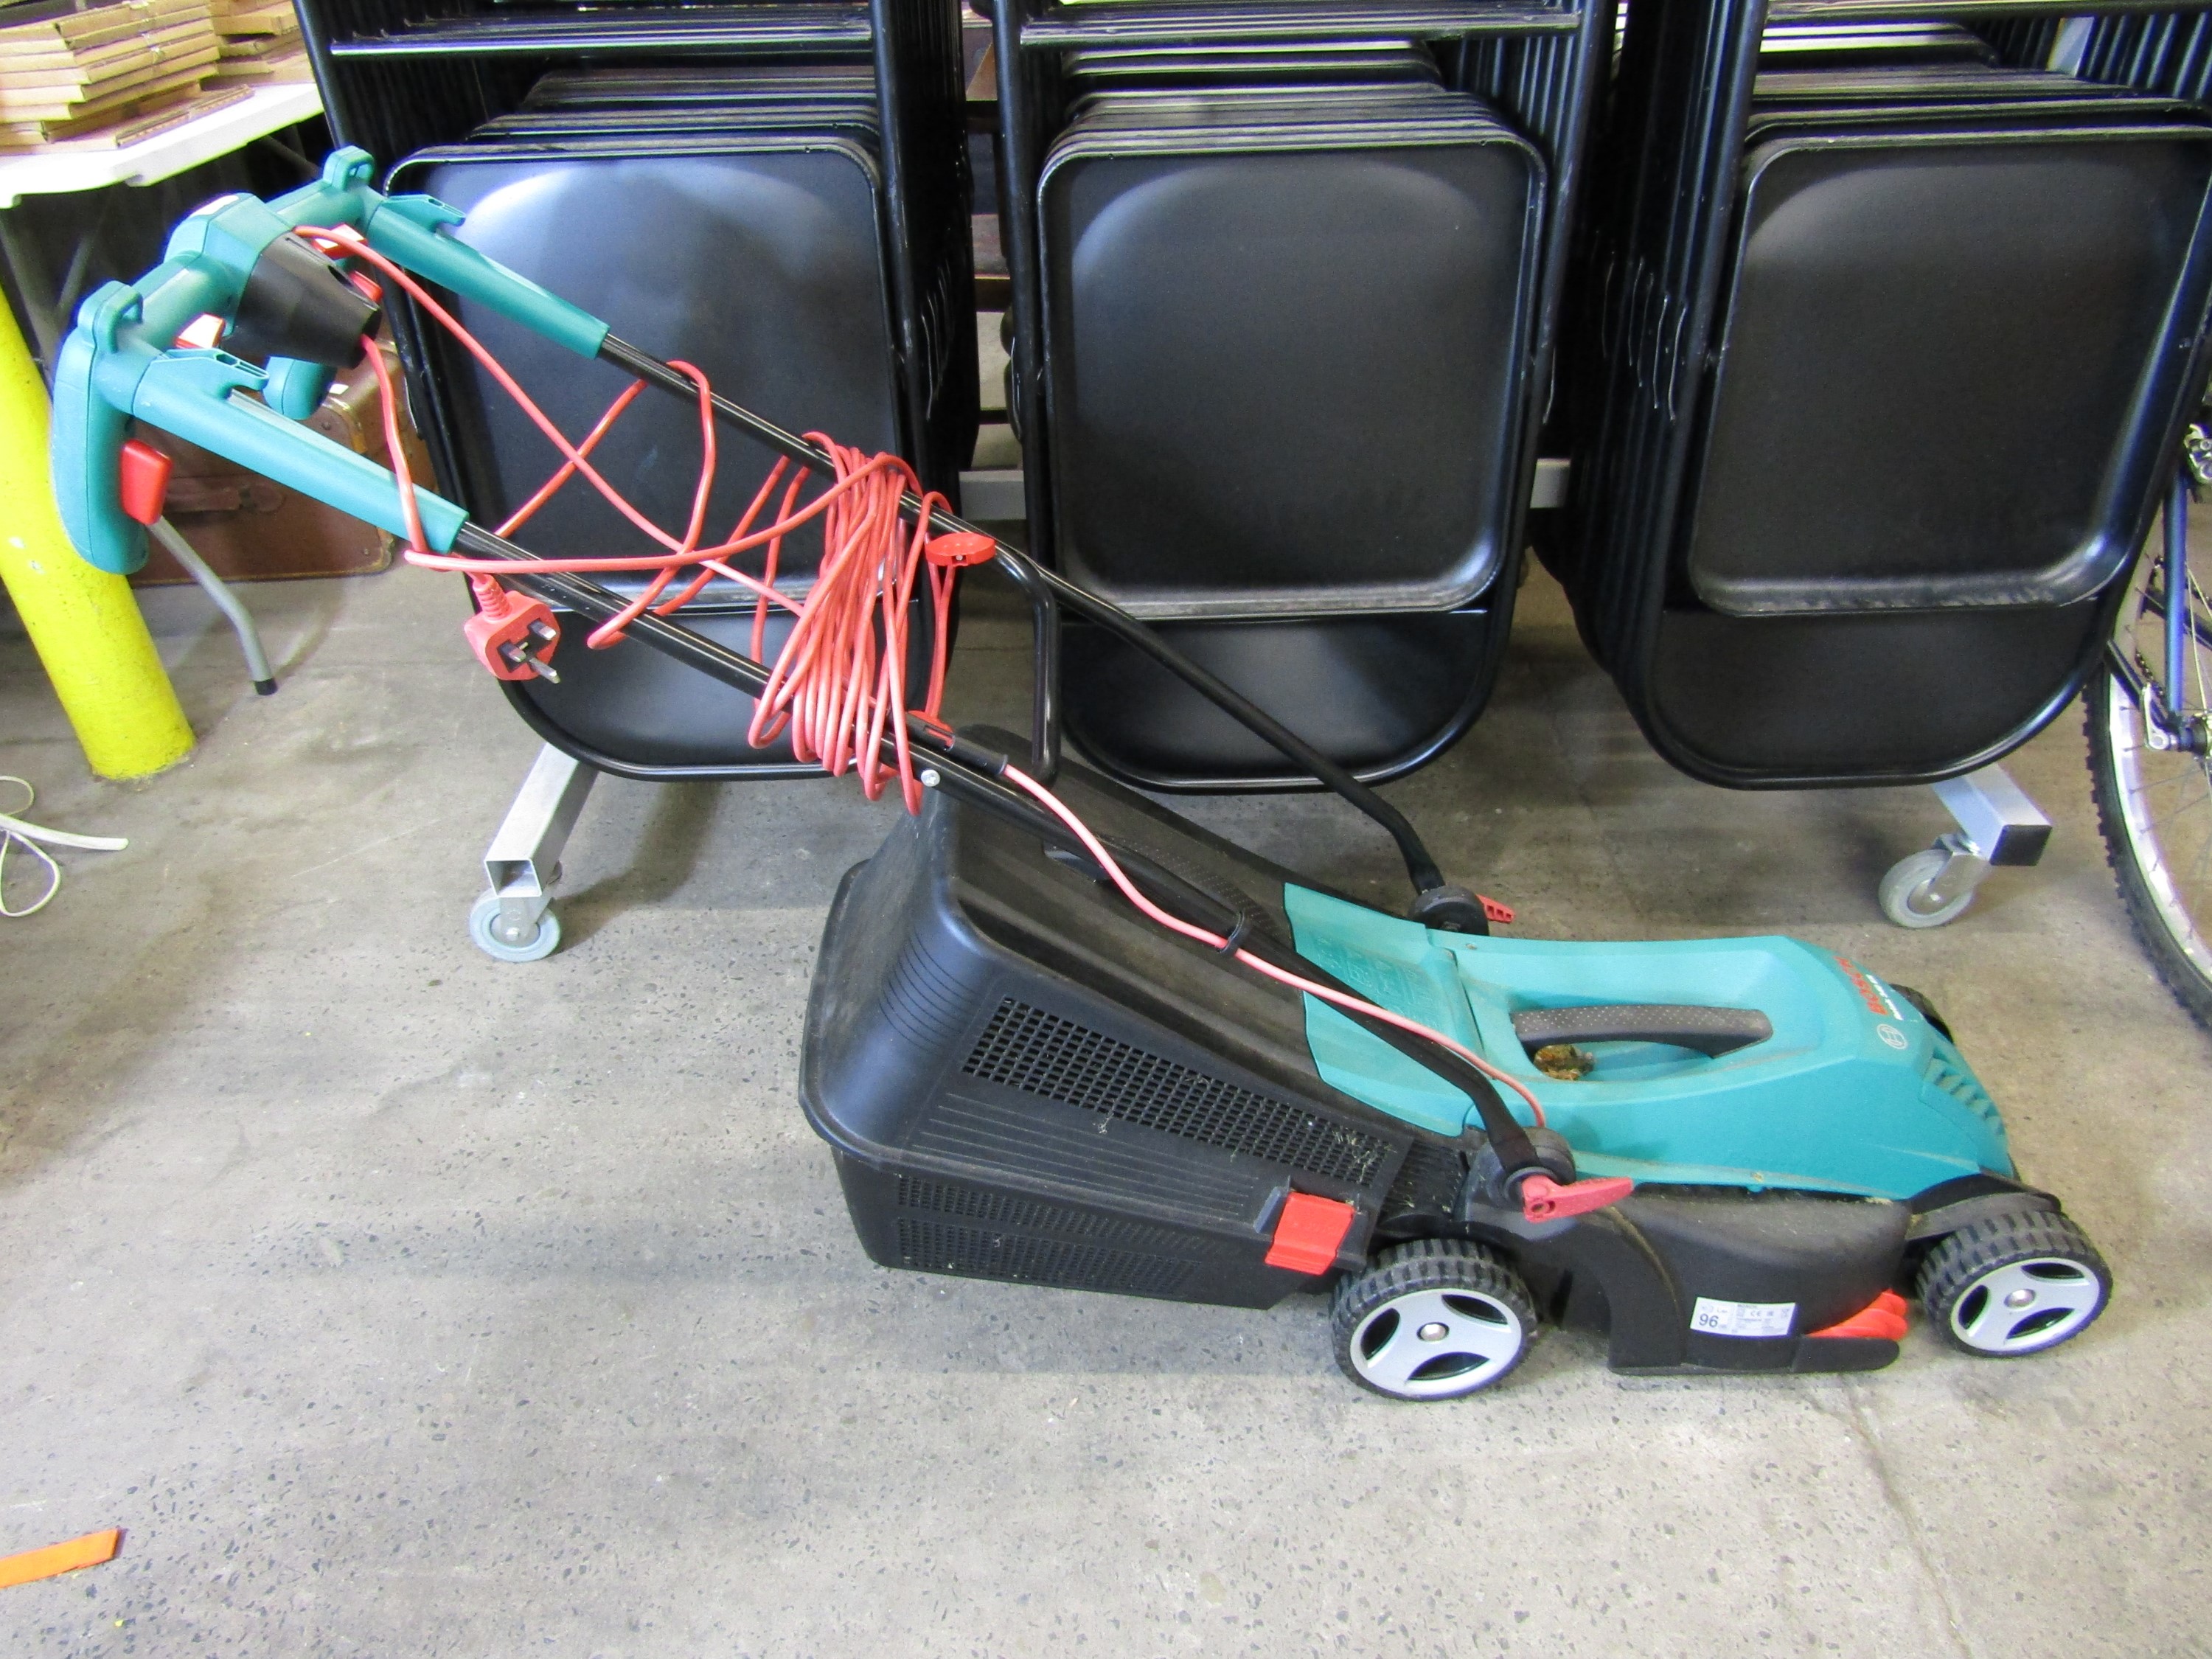 A Bosch Rotack 340 ER electric lawn mower